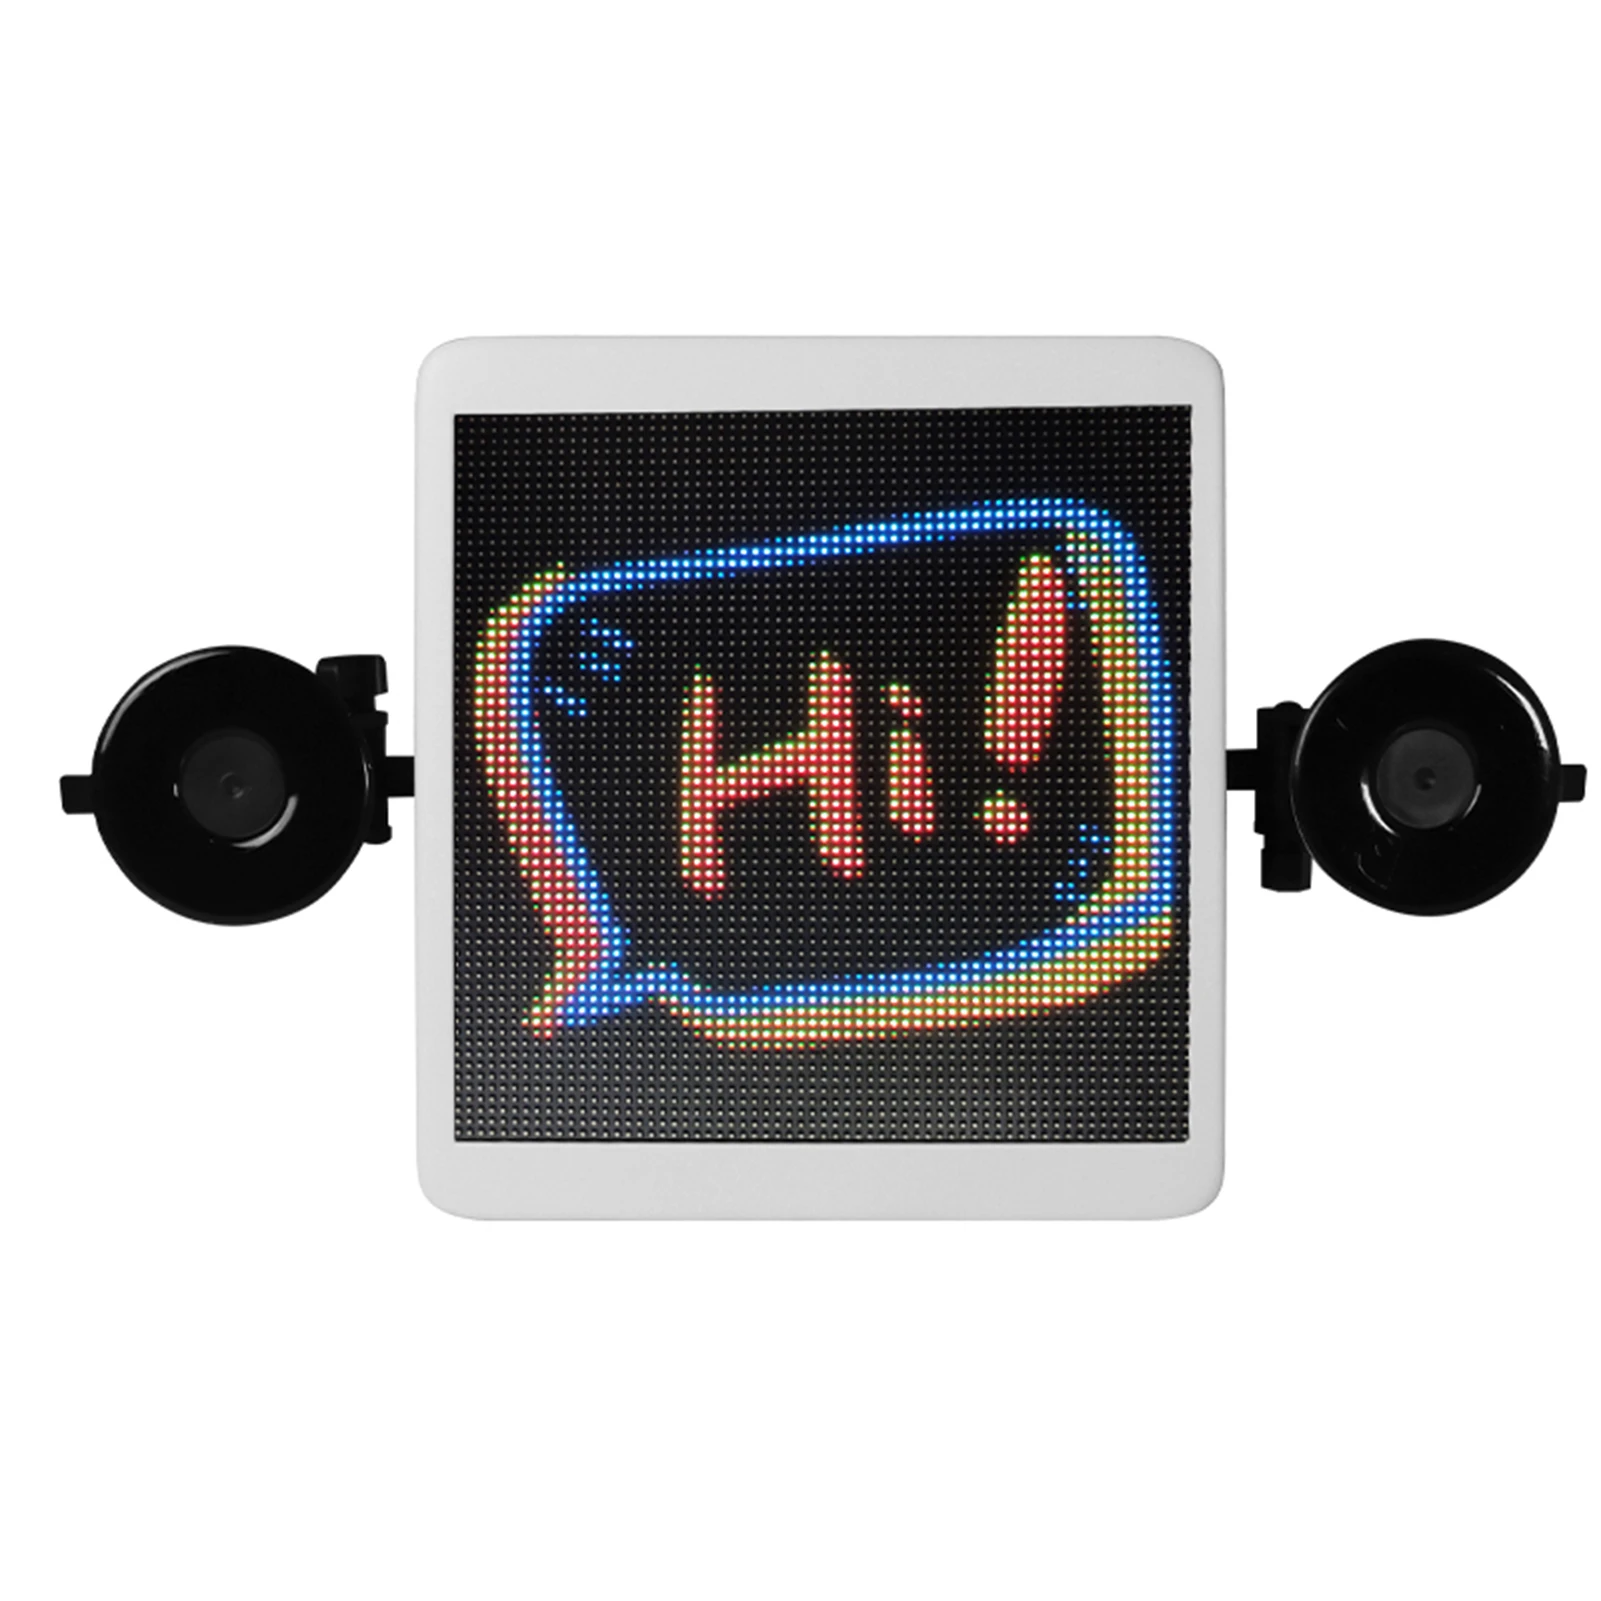 

Car DIY LED Display HD Bluetooth Voice ADs Display 8.4X7.6" Programmable Scrolling Message Board Edit picture GIF text Display